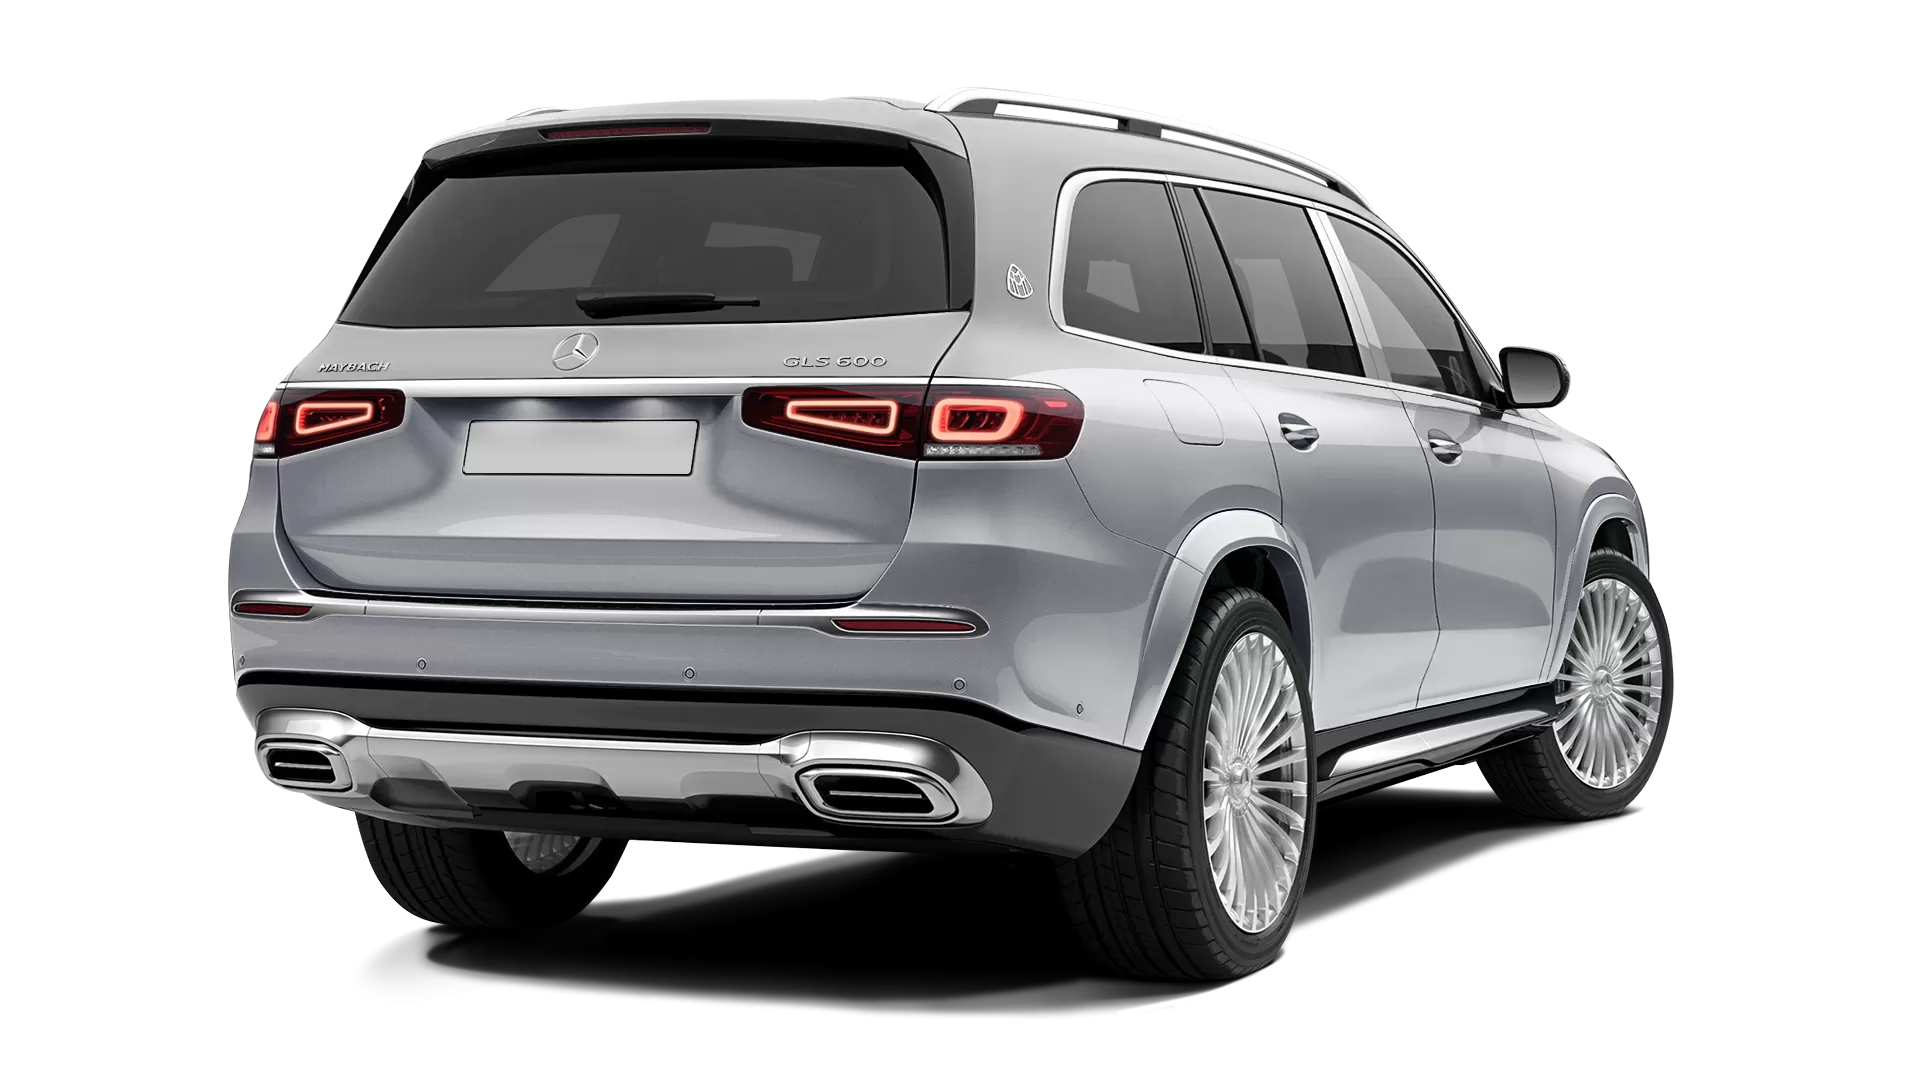 Mercedes Maybach GLS 600 stock rear view in High Tech Silver & Diamond White color